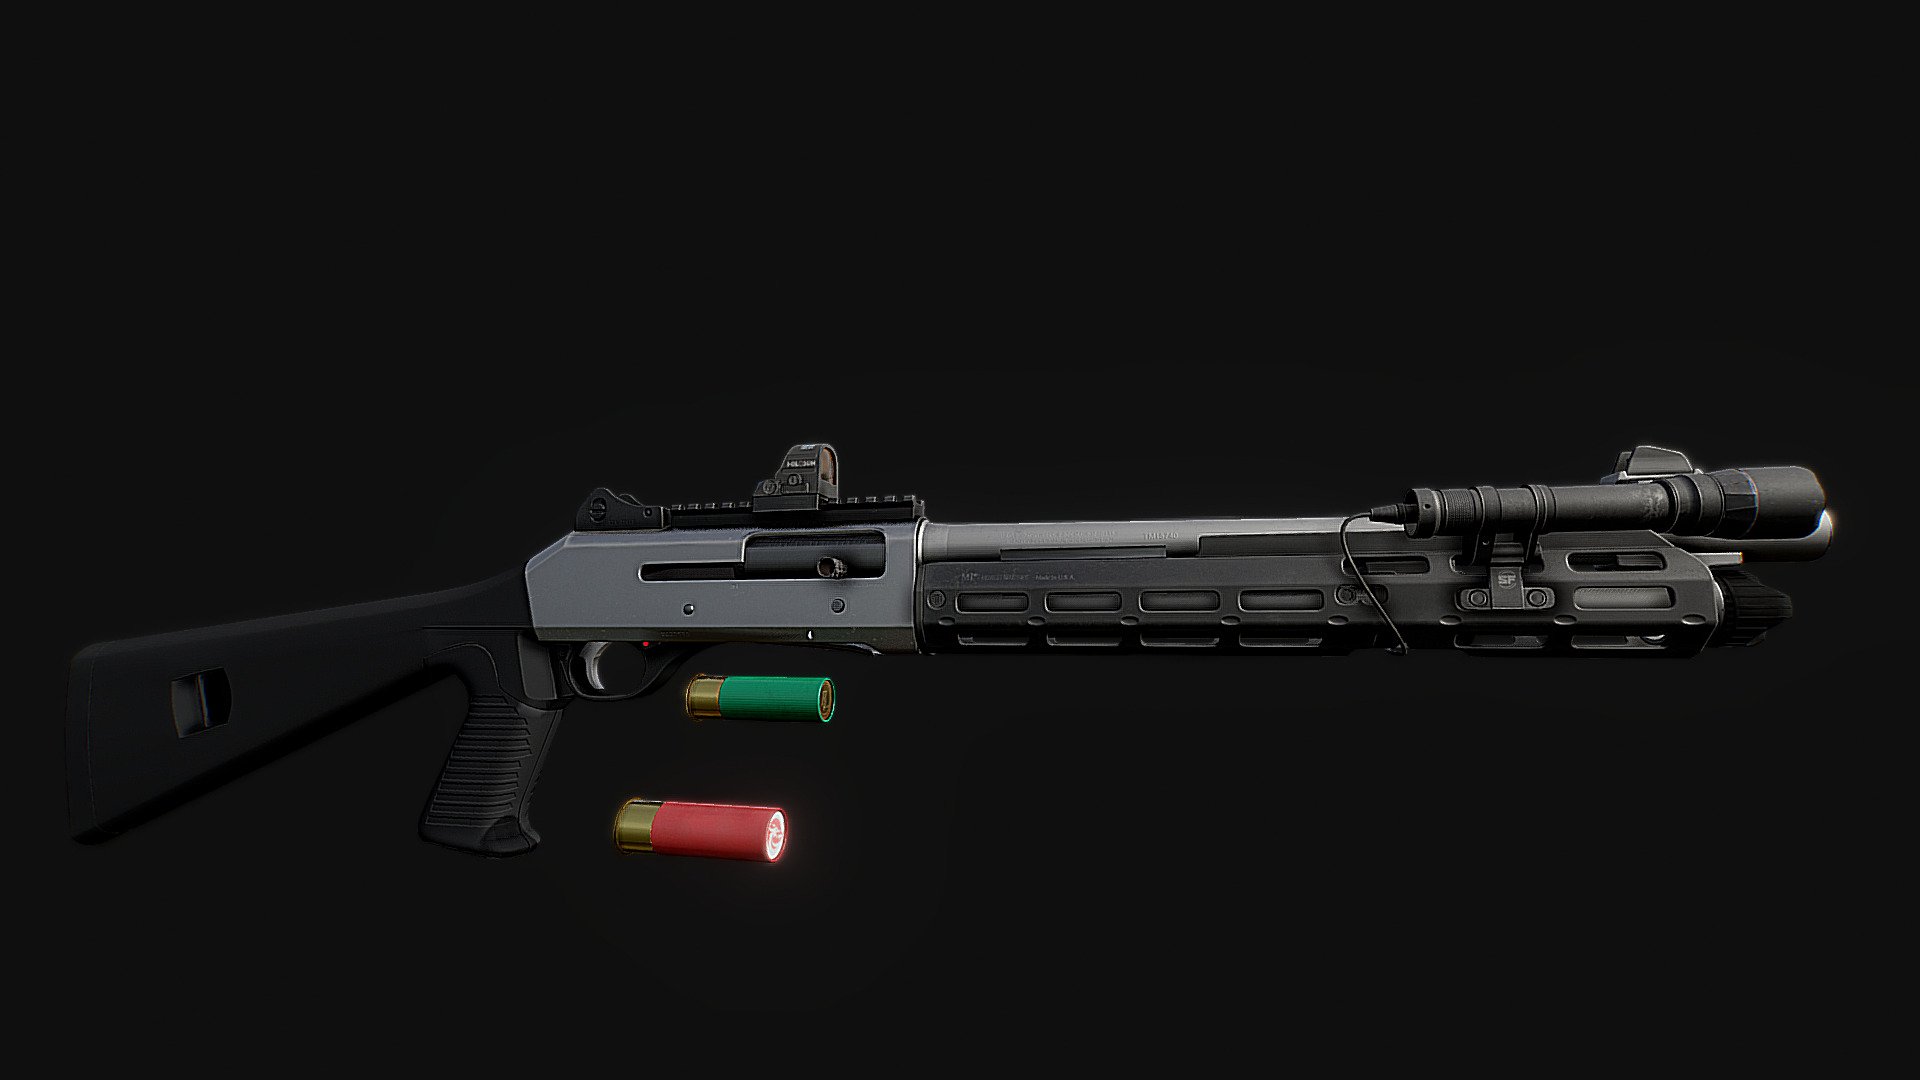 I'm happy to present a new weapon I made for fun. In total it took me 17 Hours modeling, 5 hours UVs and Bakingand 8 hours of texturing.

Handguard: Midwest.

Red Dot Sight: Holosun.

Flashlight: Surefire.

Pad: Surefire.

Weapon tris count &ndash; 20,395.

Attachements tris count &ndash; 9,136.

Bullet tris count &ndash; 640.

4 Texture Sets:

Weapon - 4096x4096res.

Attachments - 2048x2048res.

Bullet - 512x512res.

Red Dot - 256x256res 3d model